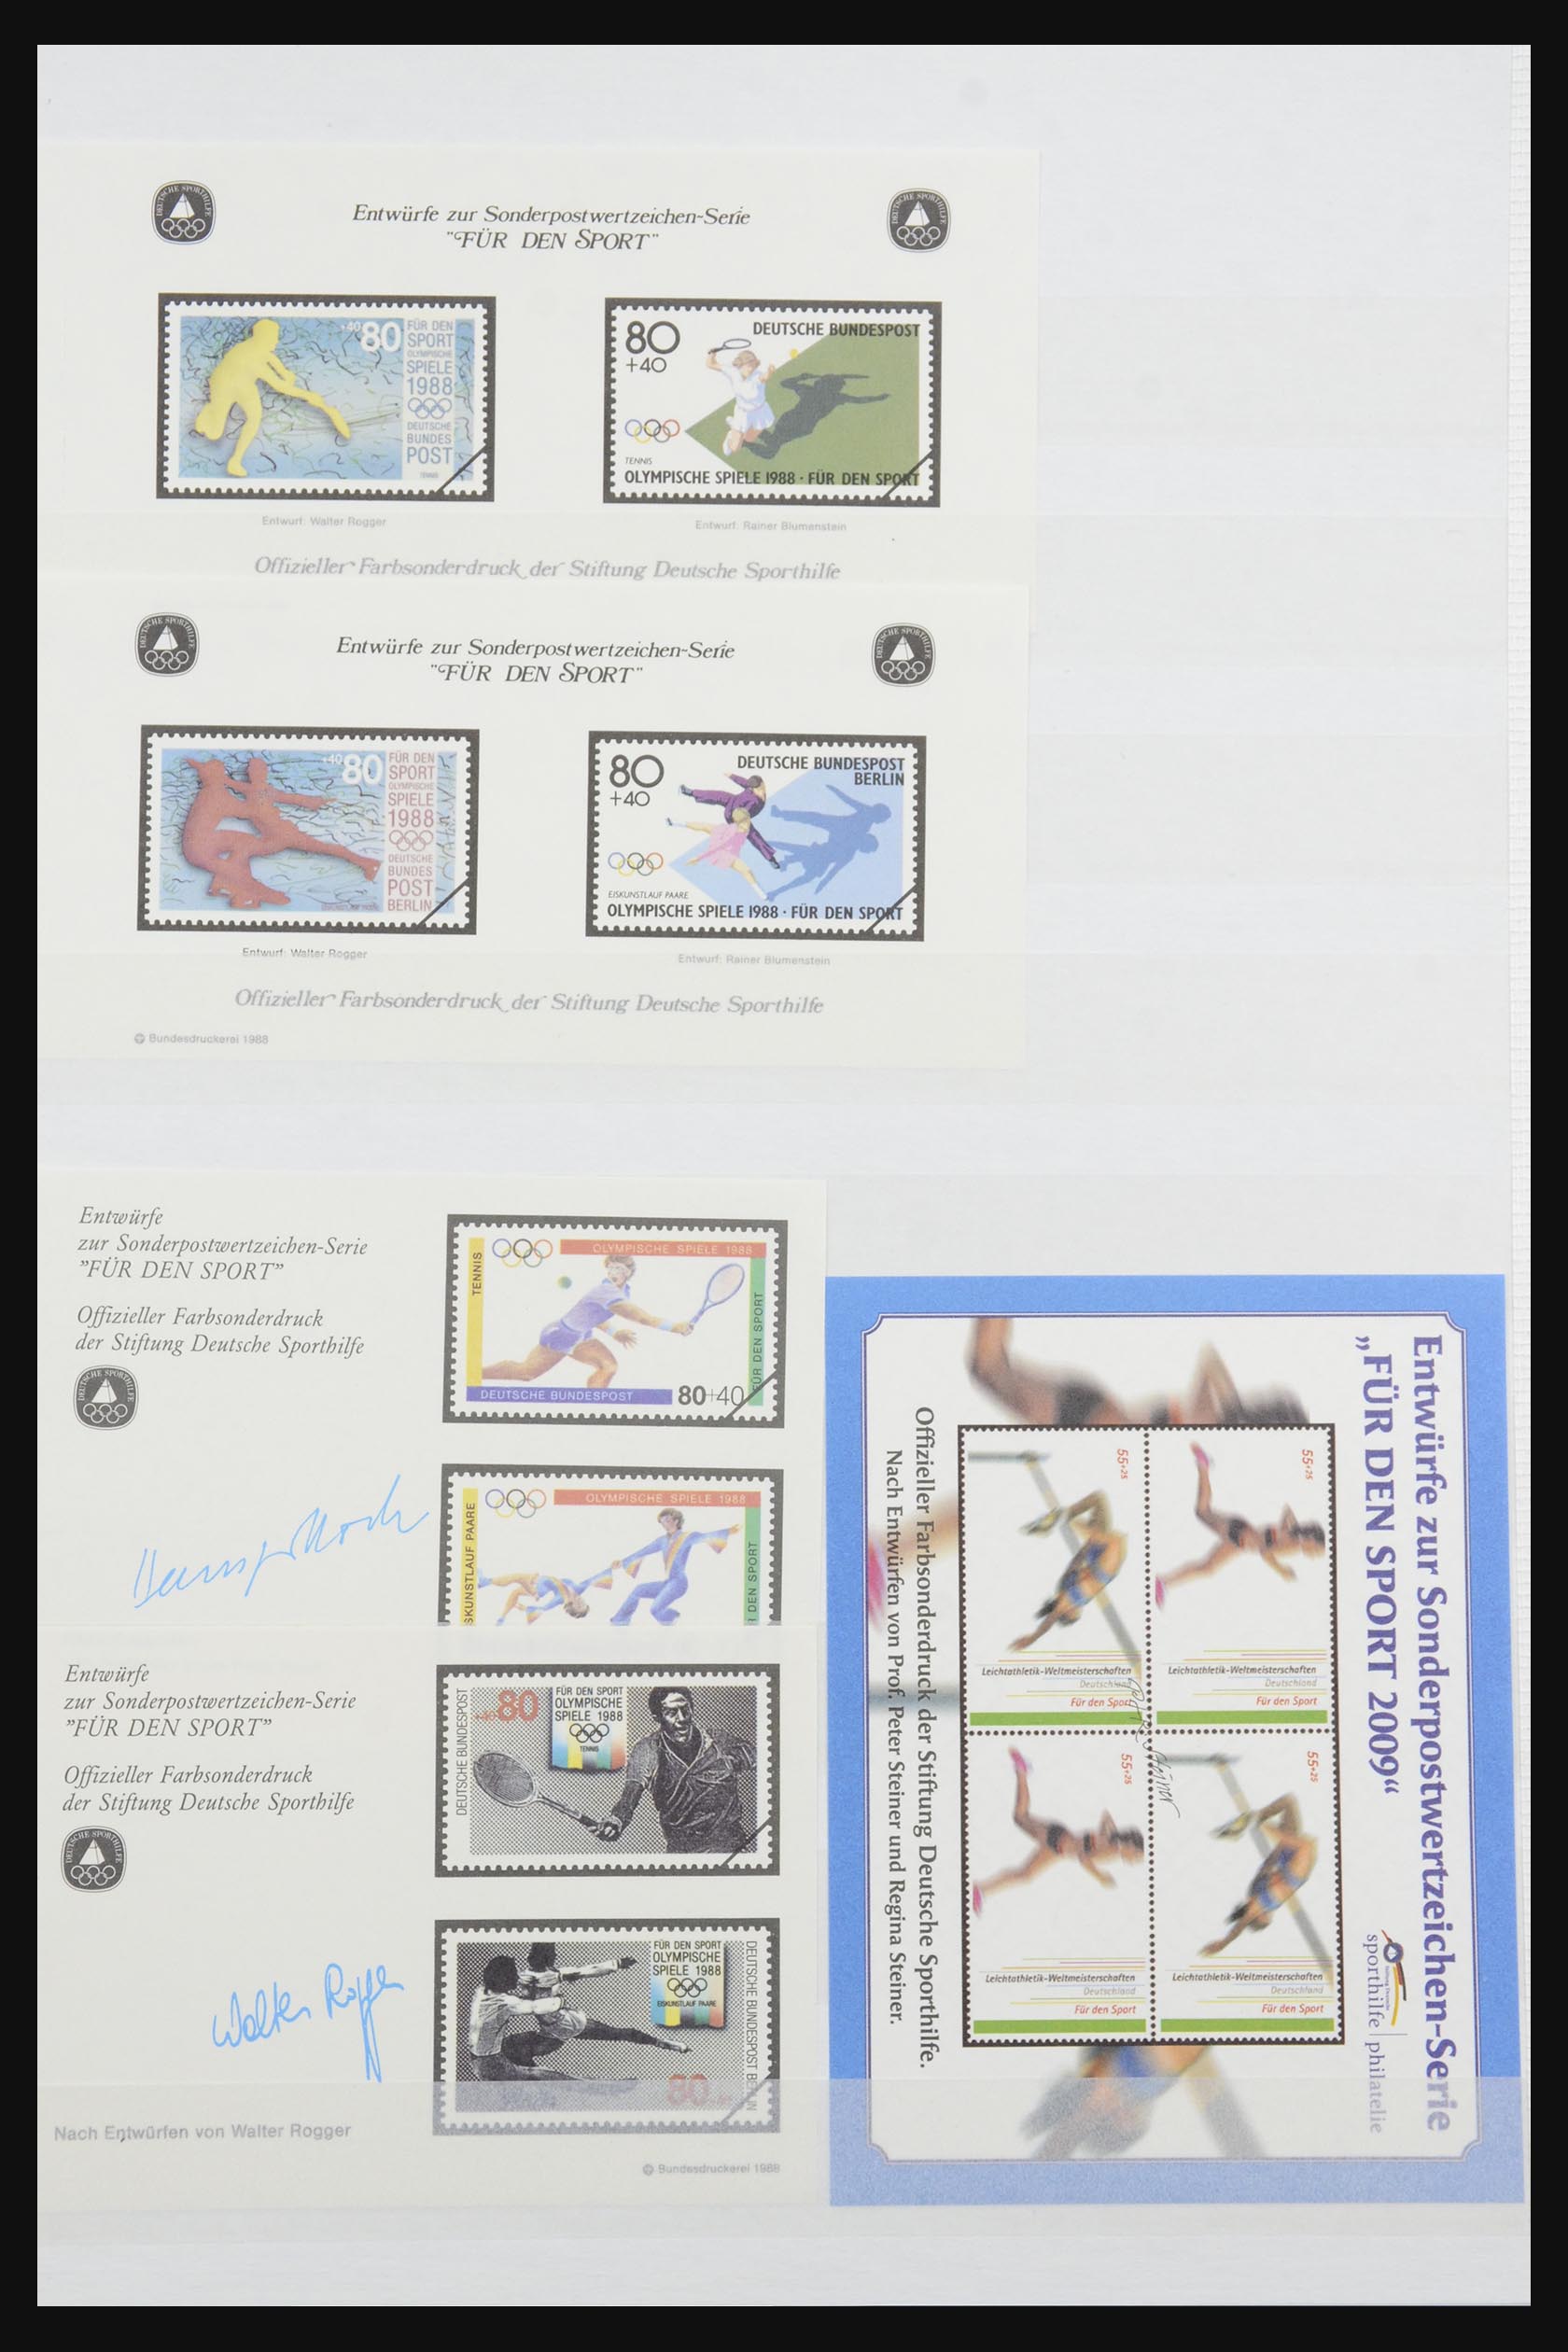 32050 010 - 32050 Bundespost special sheets 1980-2010.